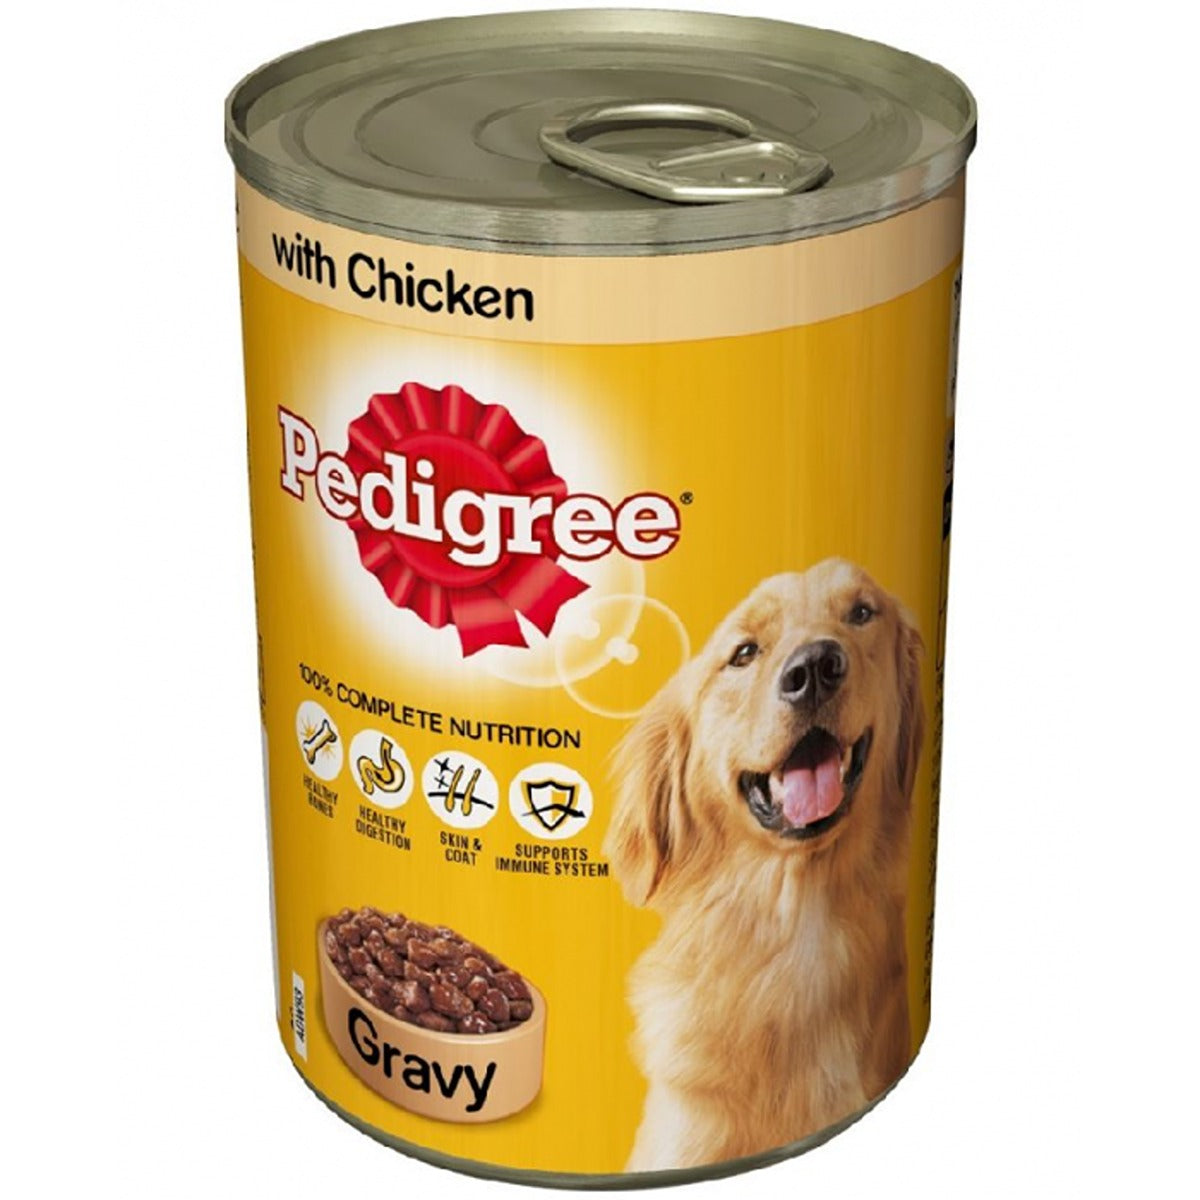 Pedigree - Wet Dog Food in Gravy Canned Tin Chicken - 400g - Continental Food Store